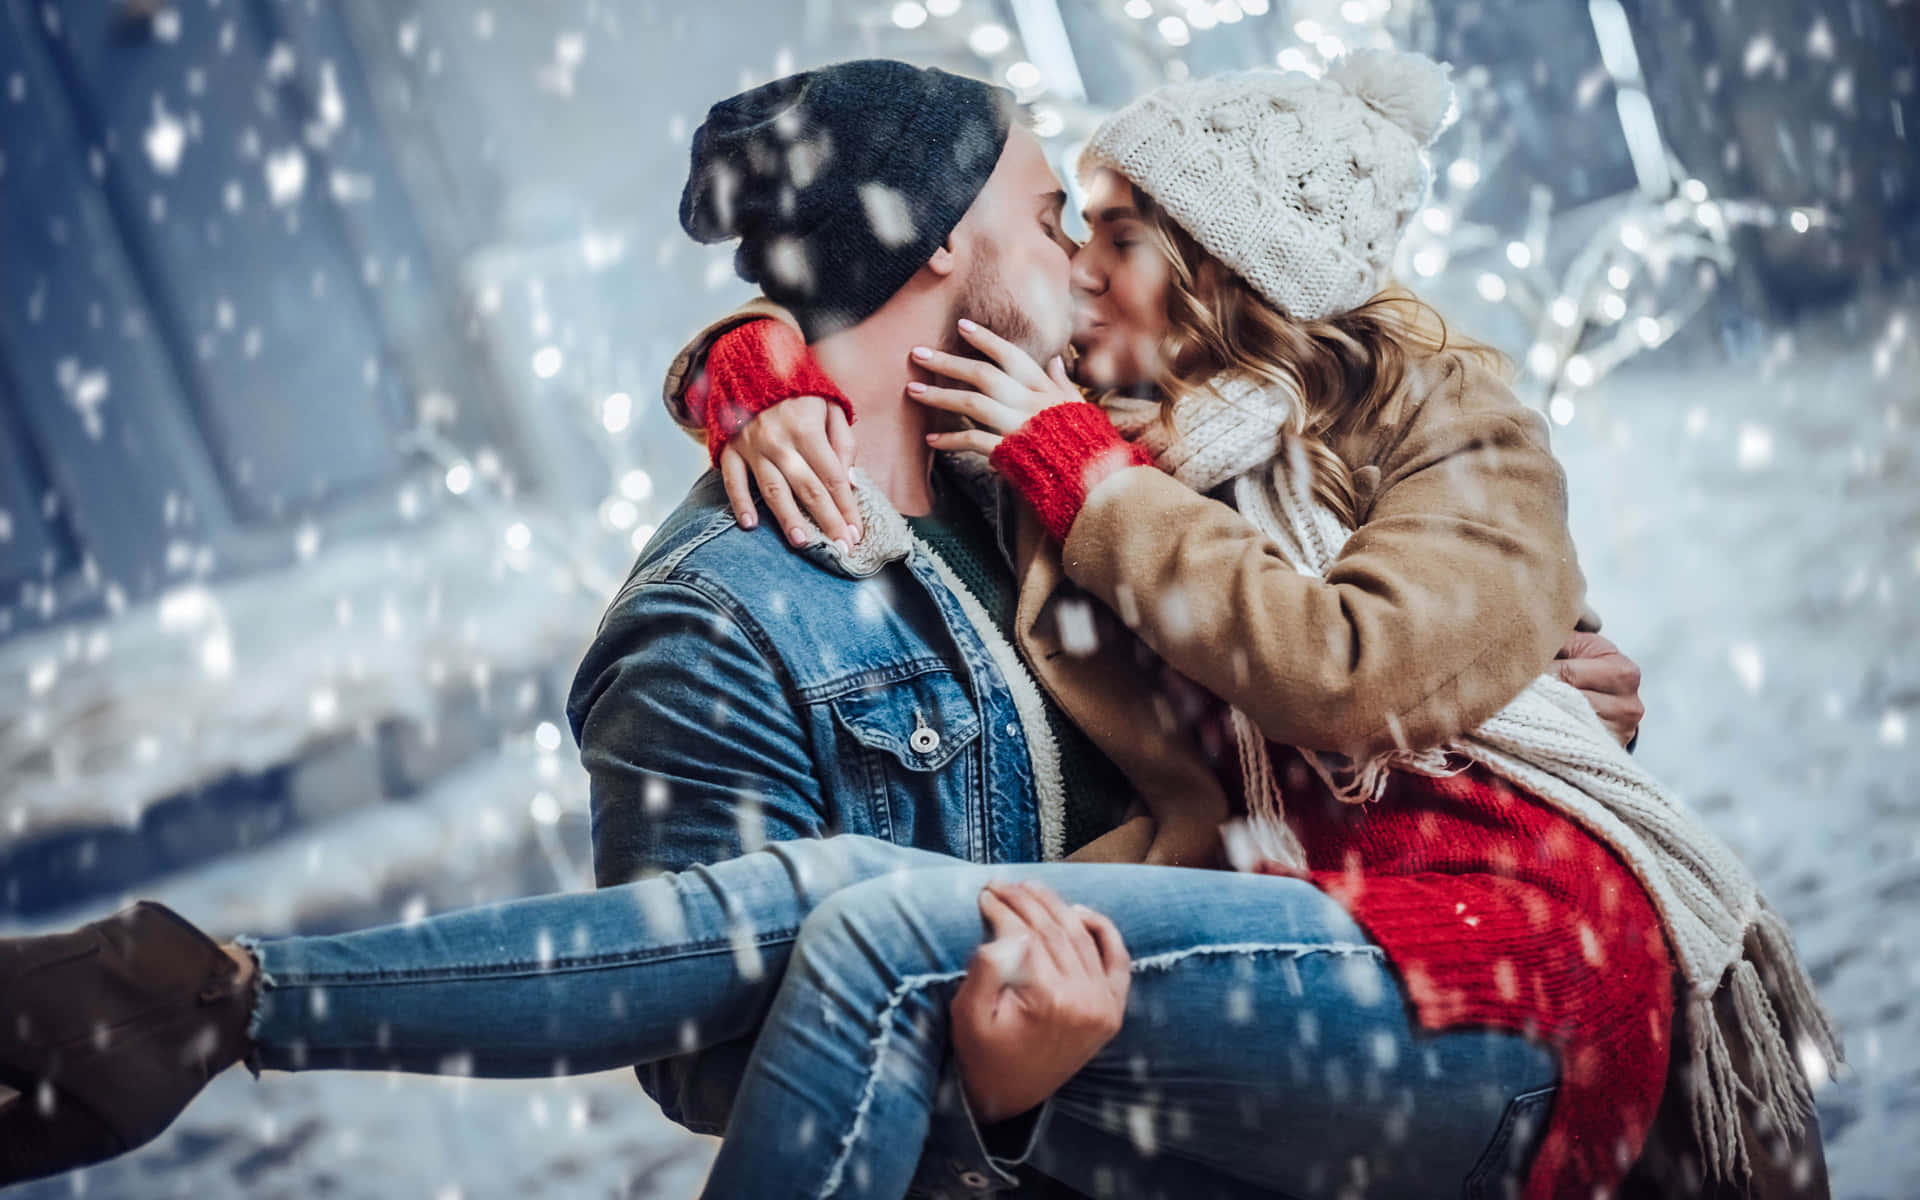 Couple Kissing While Snowing Picture